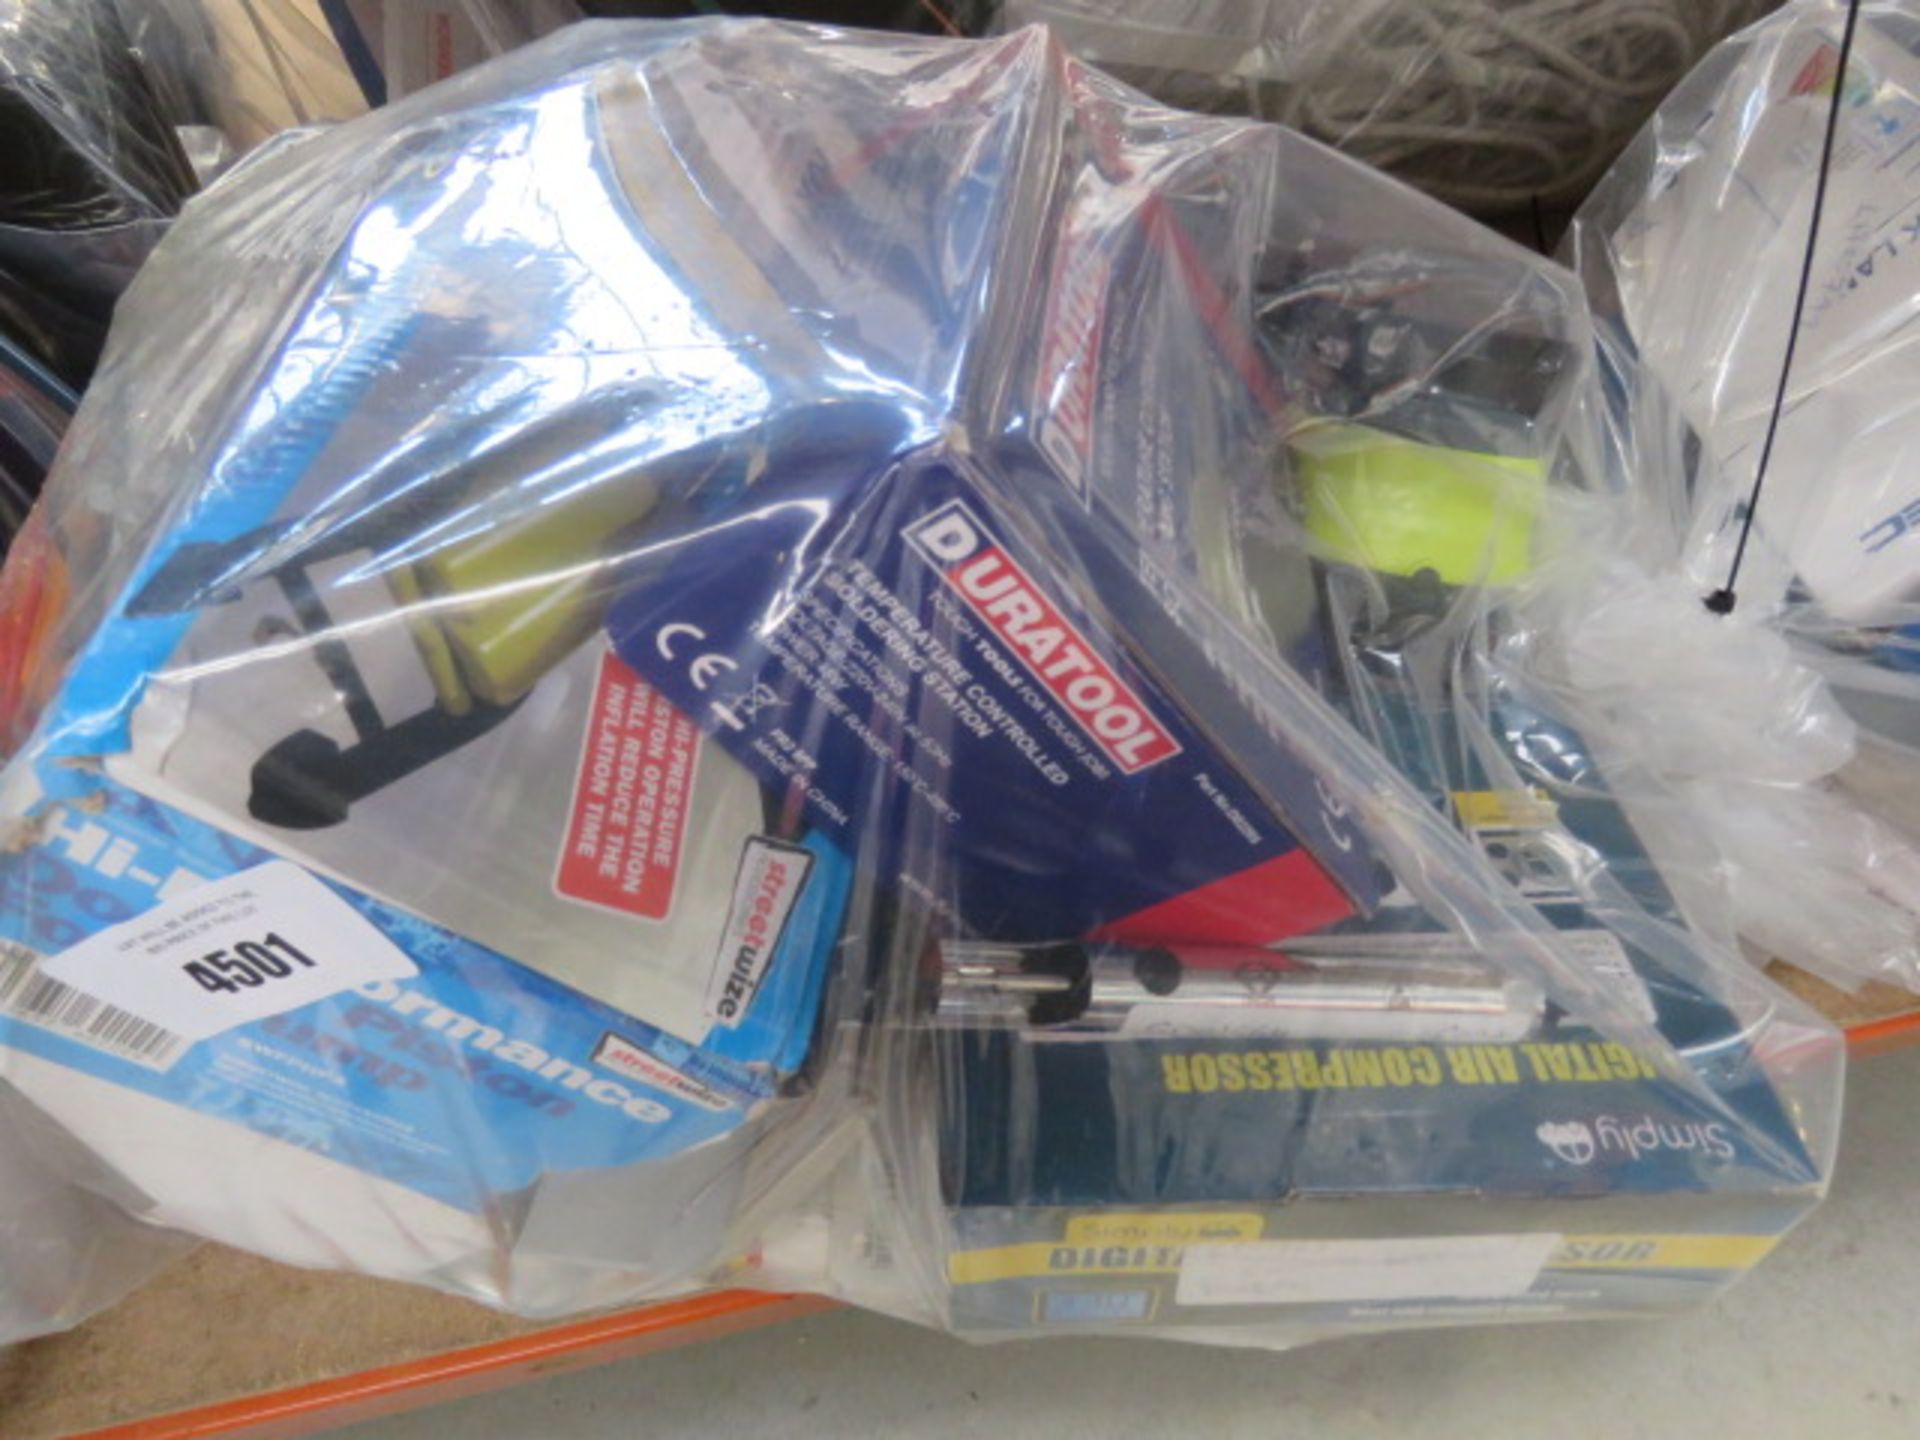 2 bags containing door piston pump, soldering stations, air compressors, cables, extension leads, - Image 2 of 3